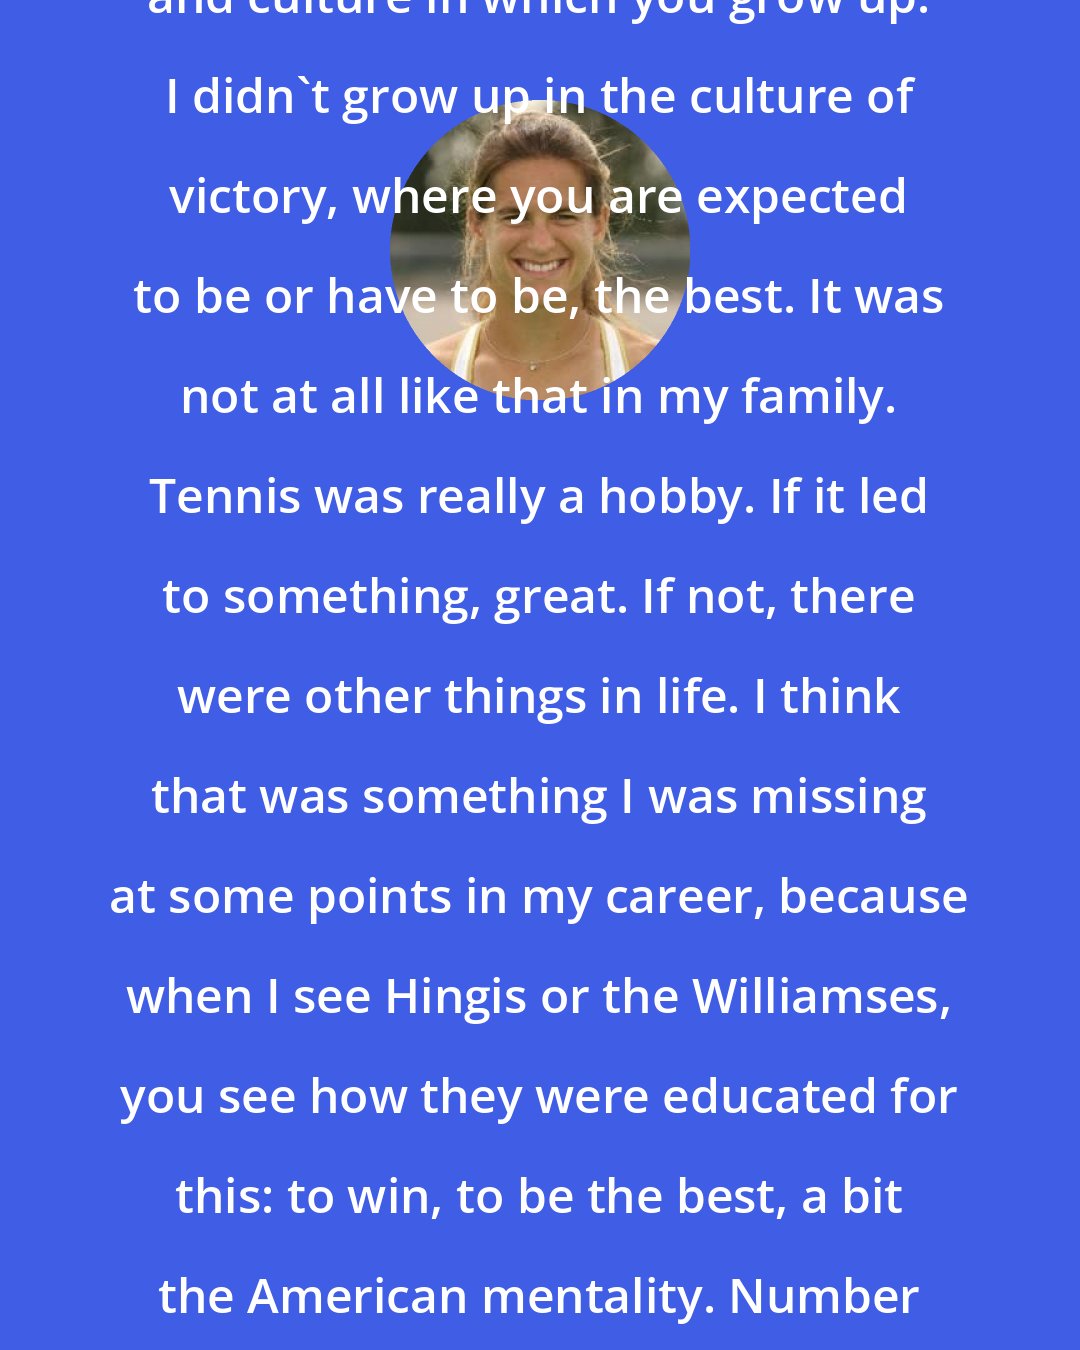 Amelie Mauresmo: Another factor is the education and culture in which you grow up. I didn't grow up in the culture of victory, where you are expected to be or have to be, the best. It was not at all like that in my family. Tennis was really a hobby. If it led to something, great. If not, there were other things in life. I think that was something I was missing at some points in my career, because when I see Hingis or the Williamses, you see how they were educated for this: to win, to be the best, a bit the American mentality. Number one. Number one. Number one. I didn't have this.